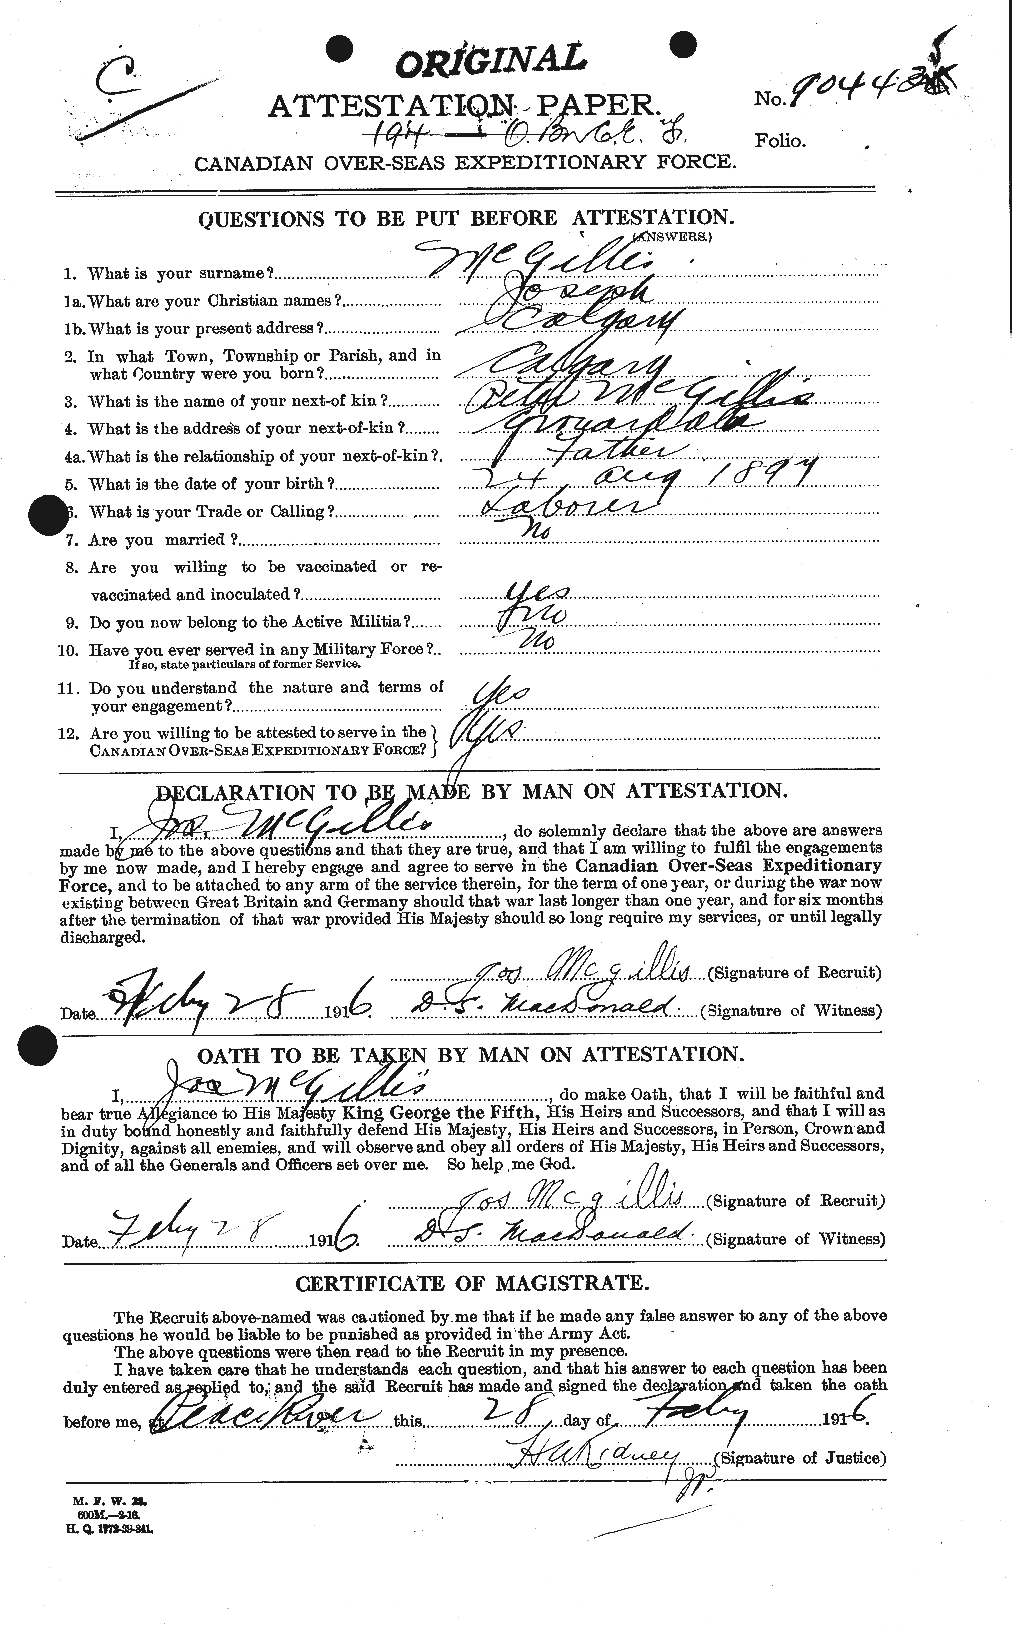 Personnel Records of the First World War - CEF 523997a